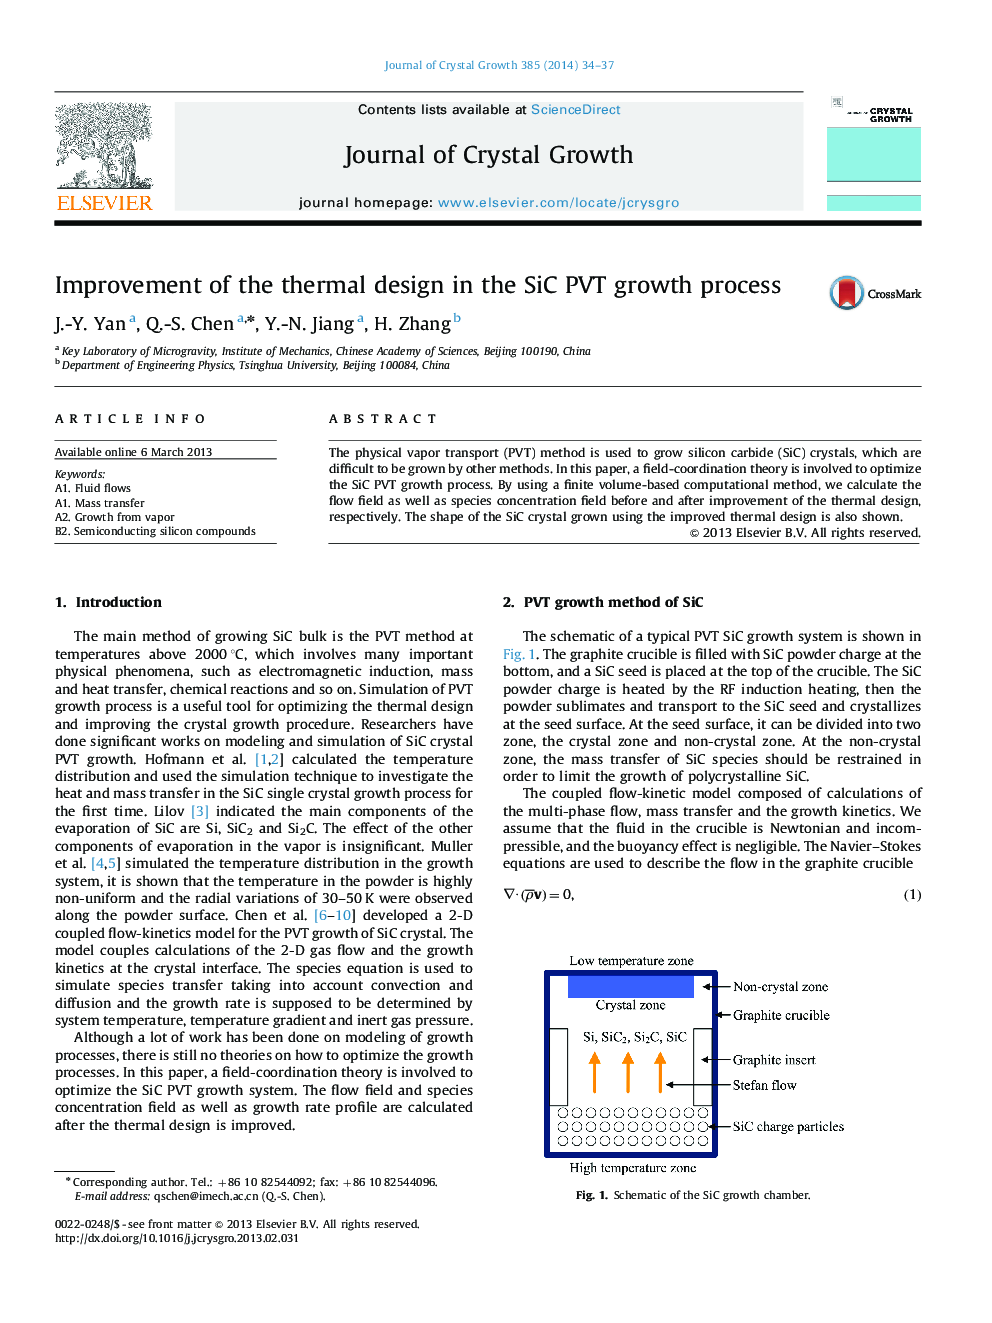 Improvement of the thermal design in the SiC PVT growth process